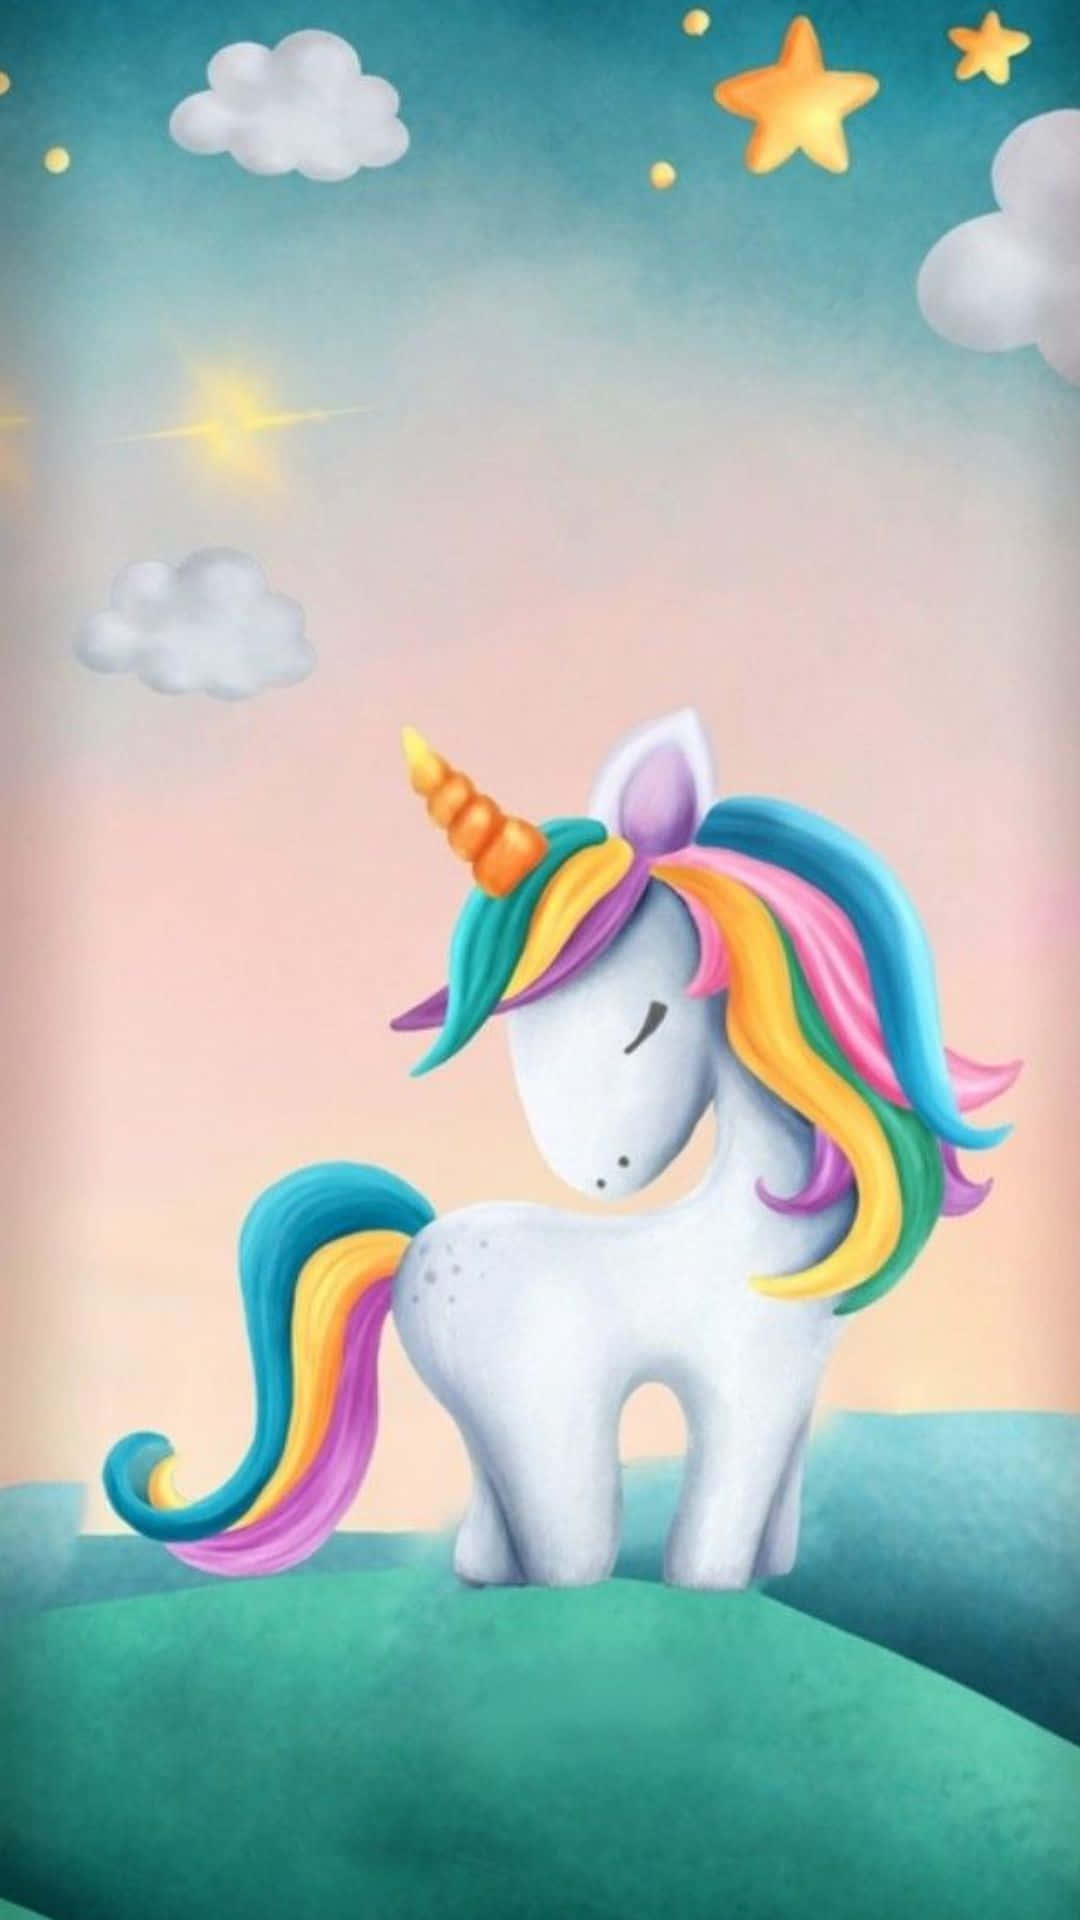 Unicorn With Golden Horn Background